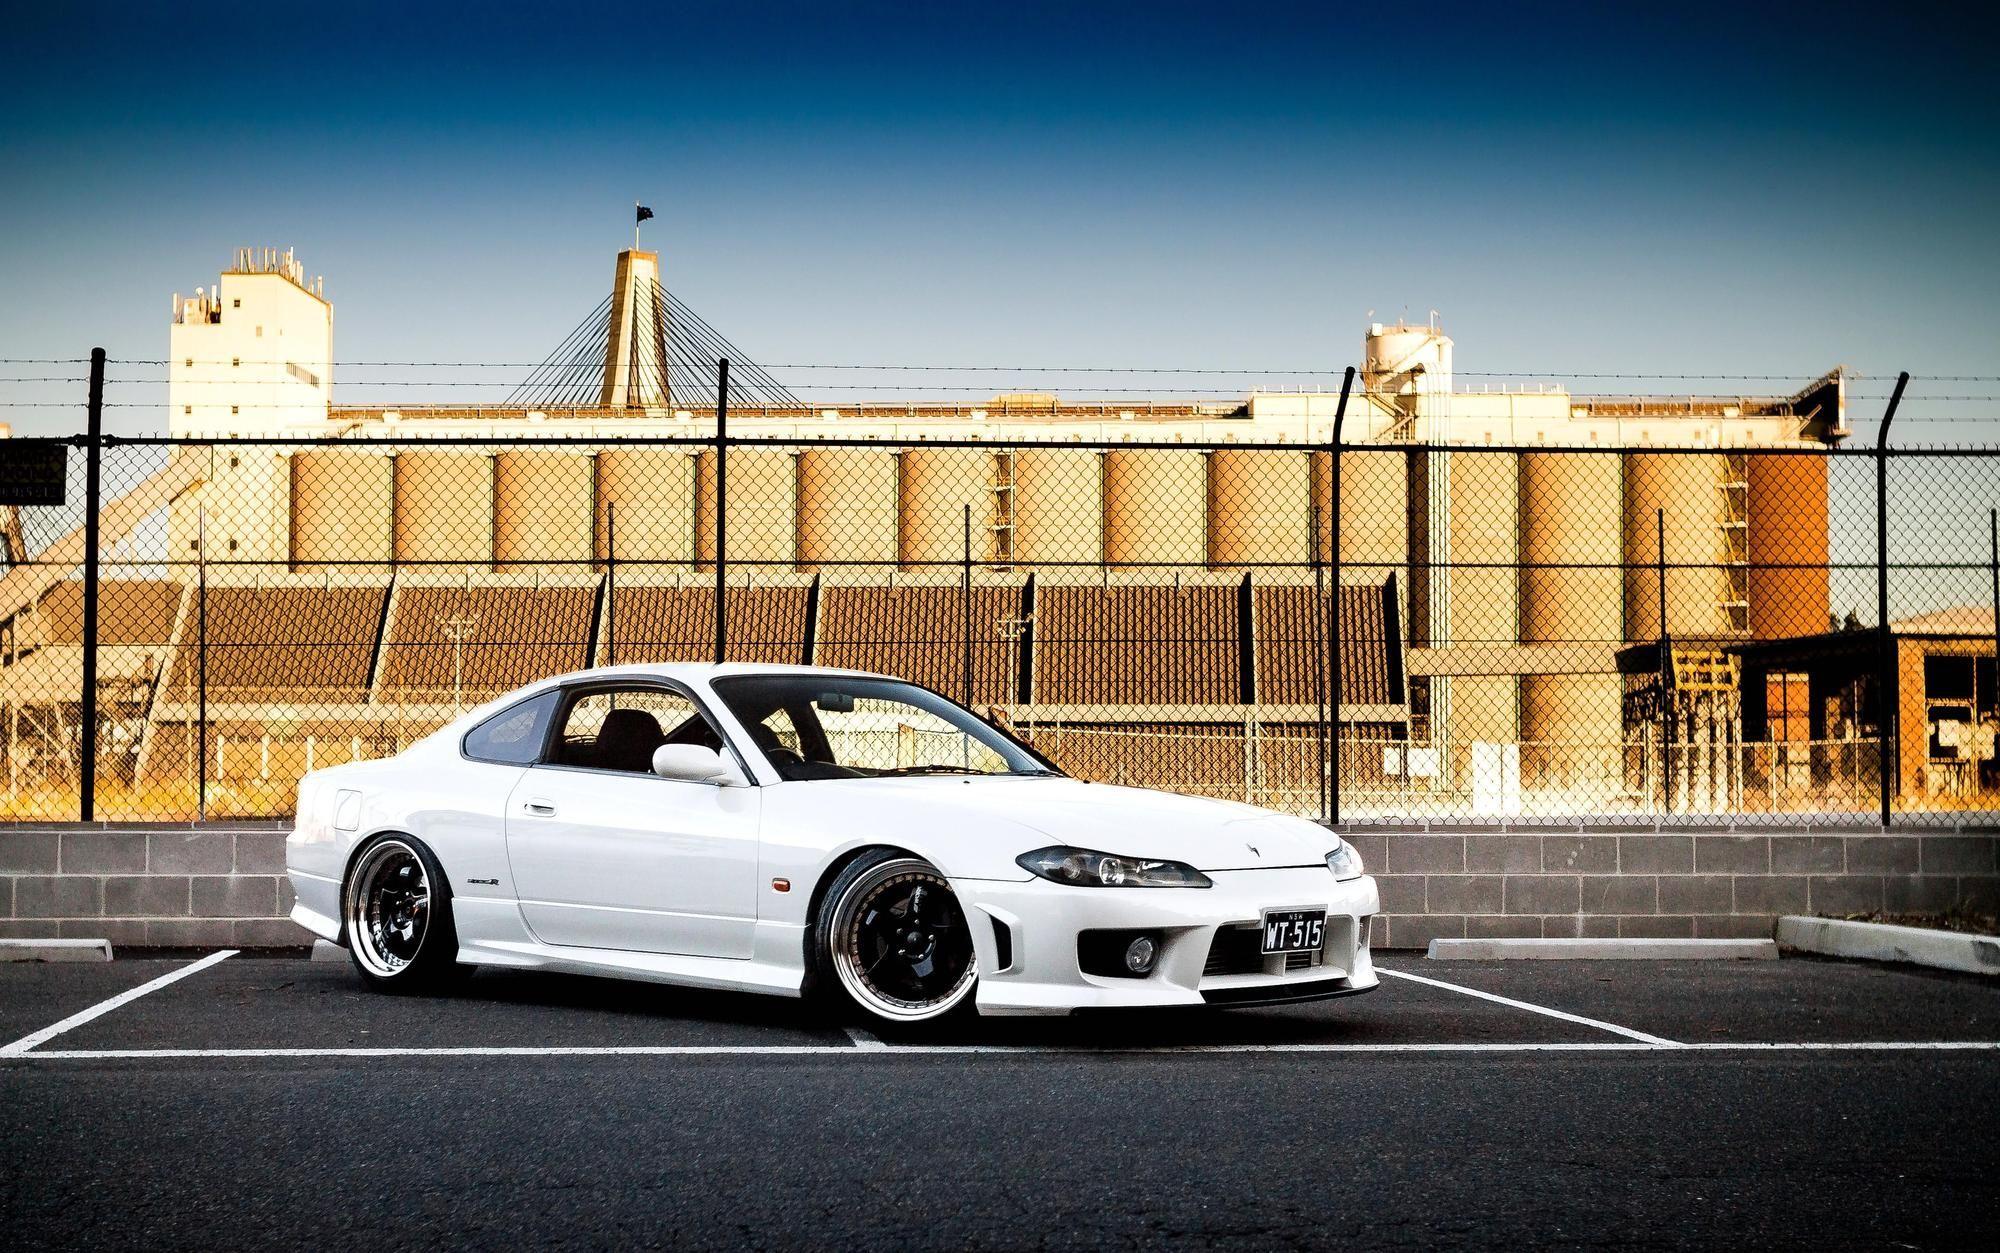 Nissan Silvia S15 Wallpapers Top Free Nissan Silvia S15 Backgrounds Wallpaperaccess